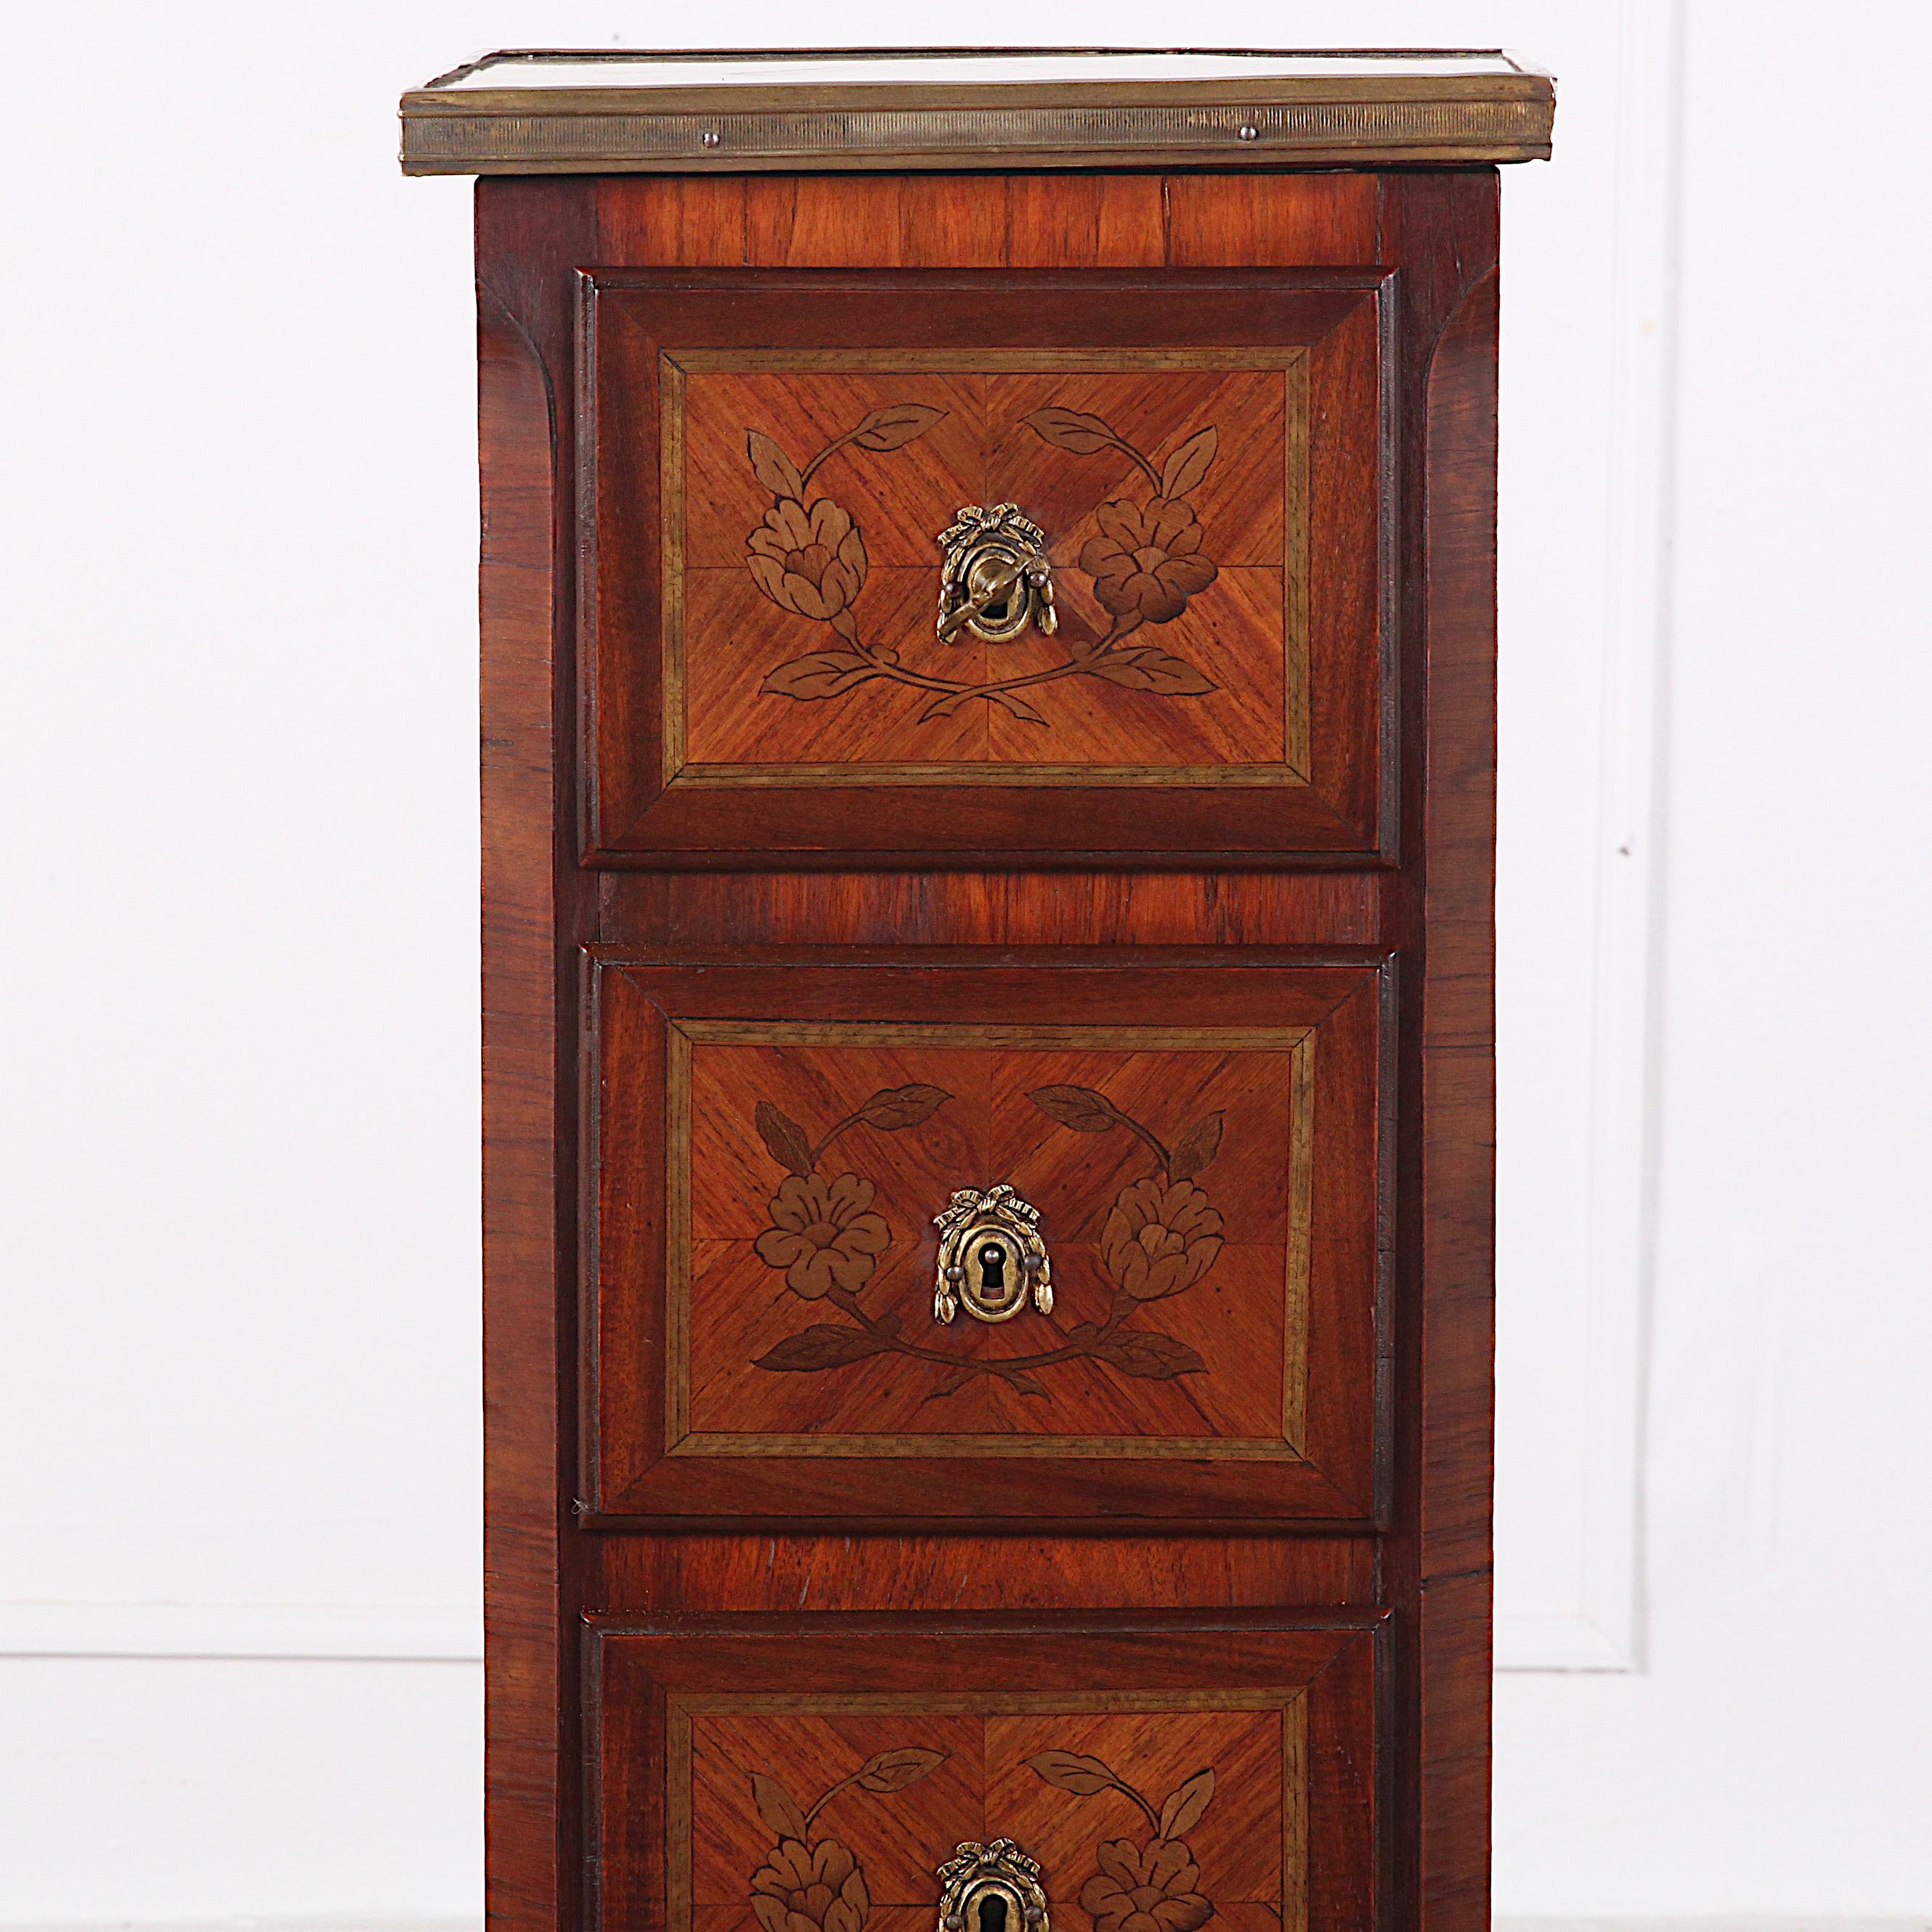 Kingwood Small Inlaid Marble Topped Chest of Drawers